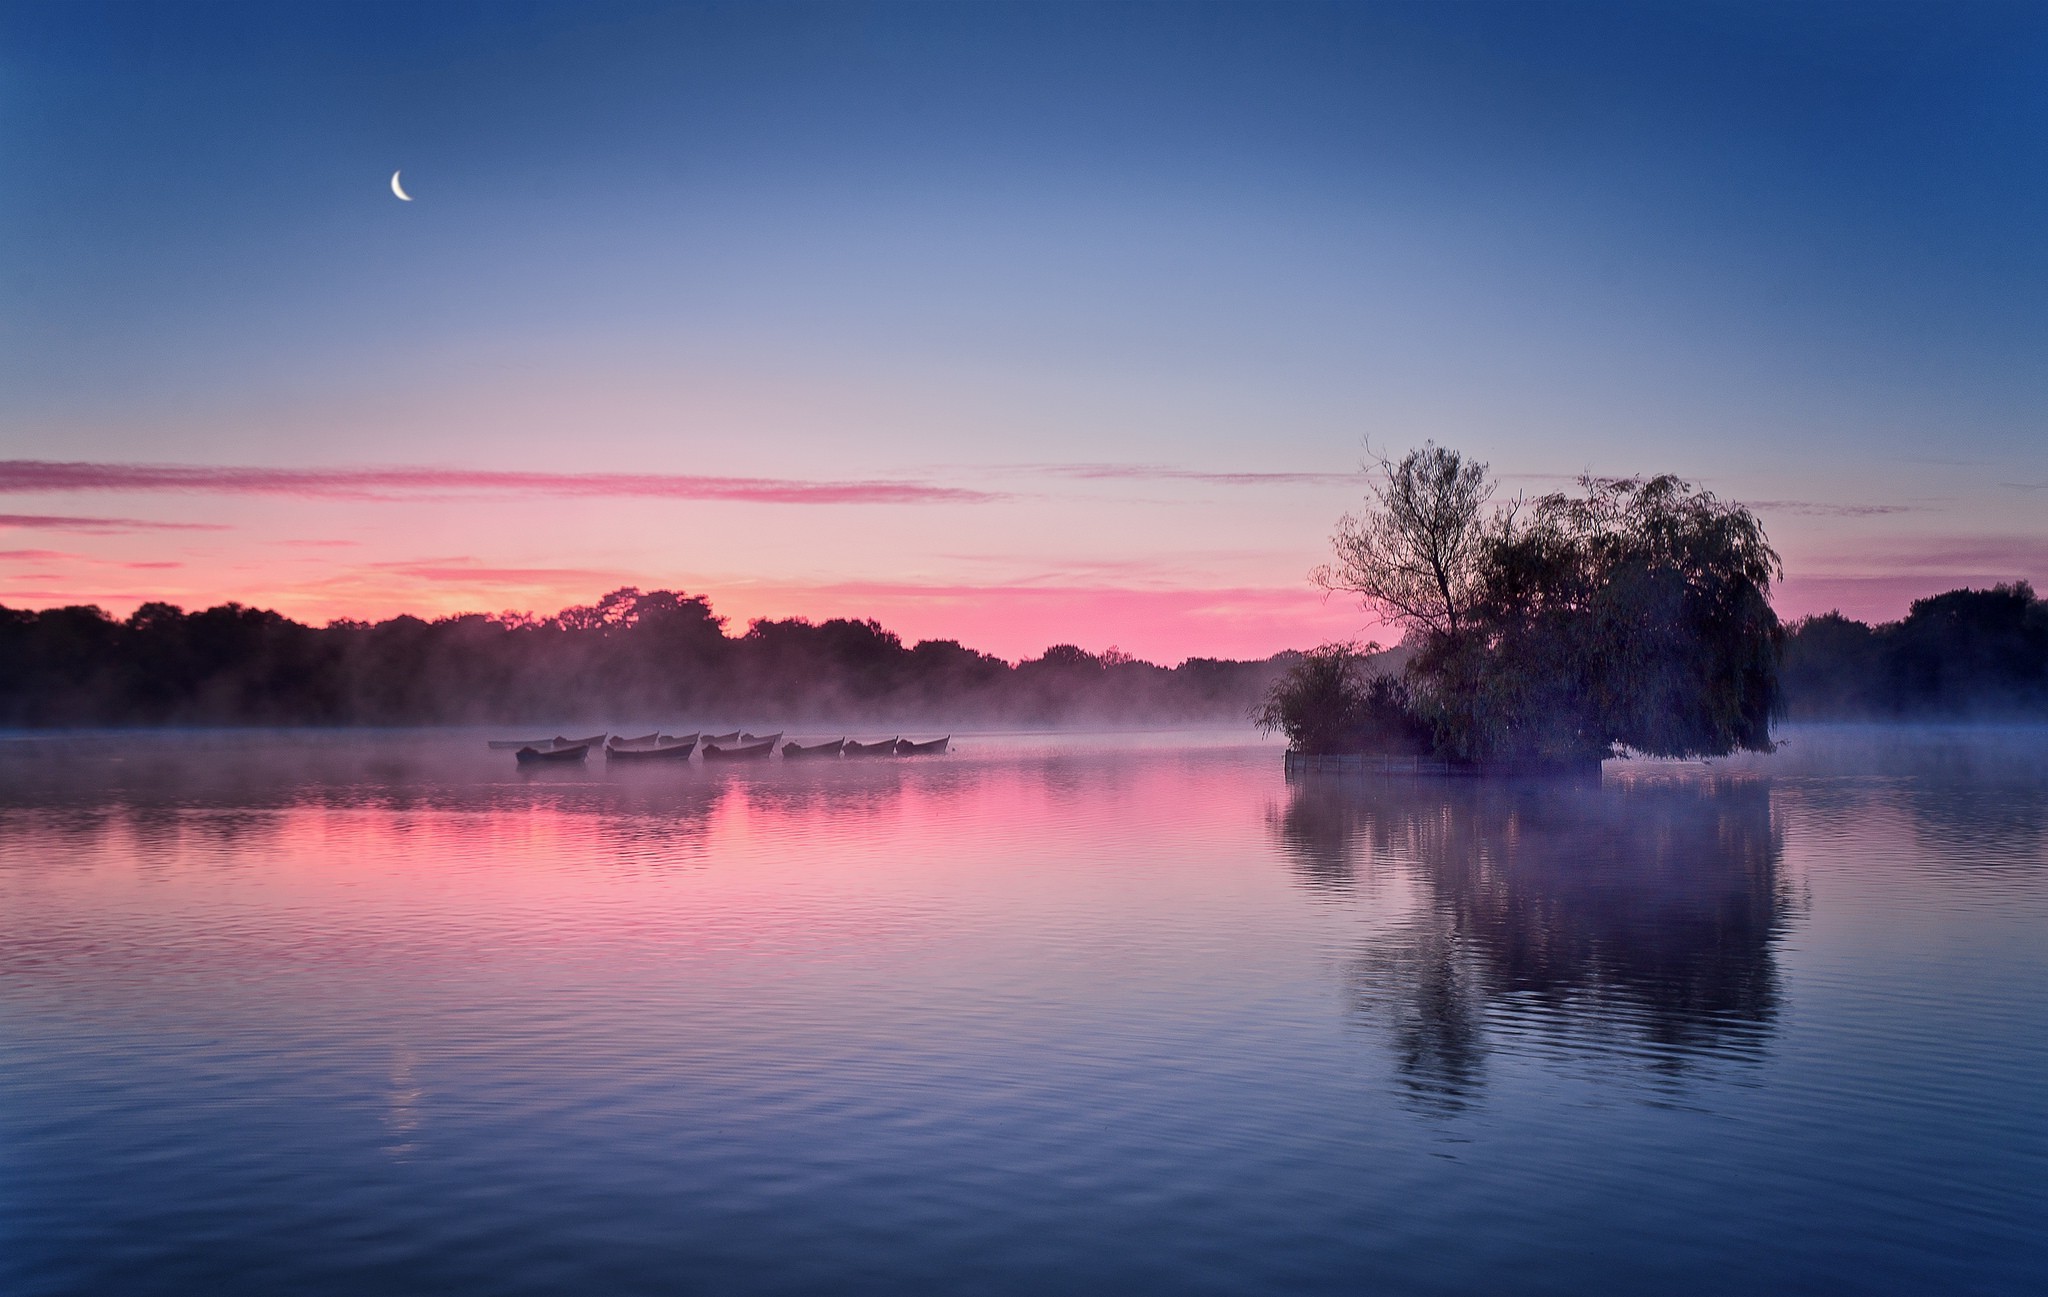 photography, Nature, Landscape, Morning, Mist, Daylight, Lake, Boat, Trees, Calm, Moon, England Wallpaper HD / Desktop and Mobile Background